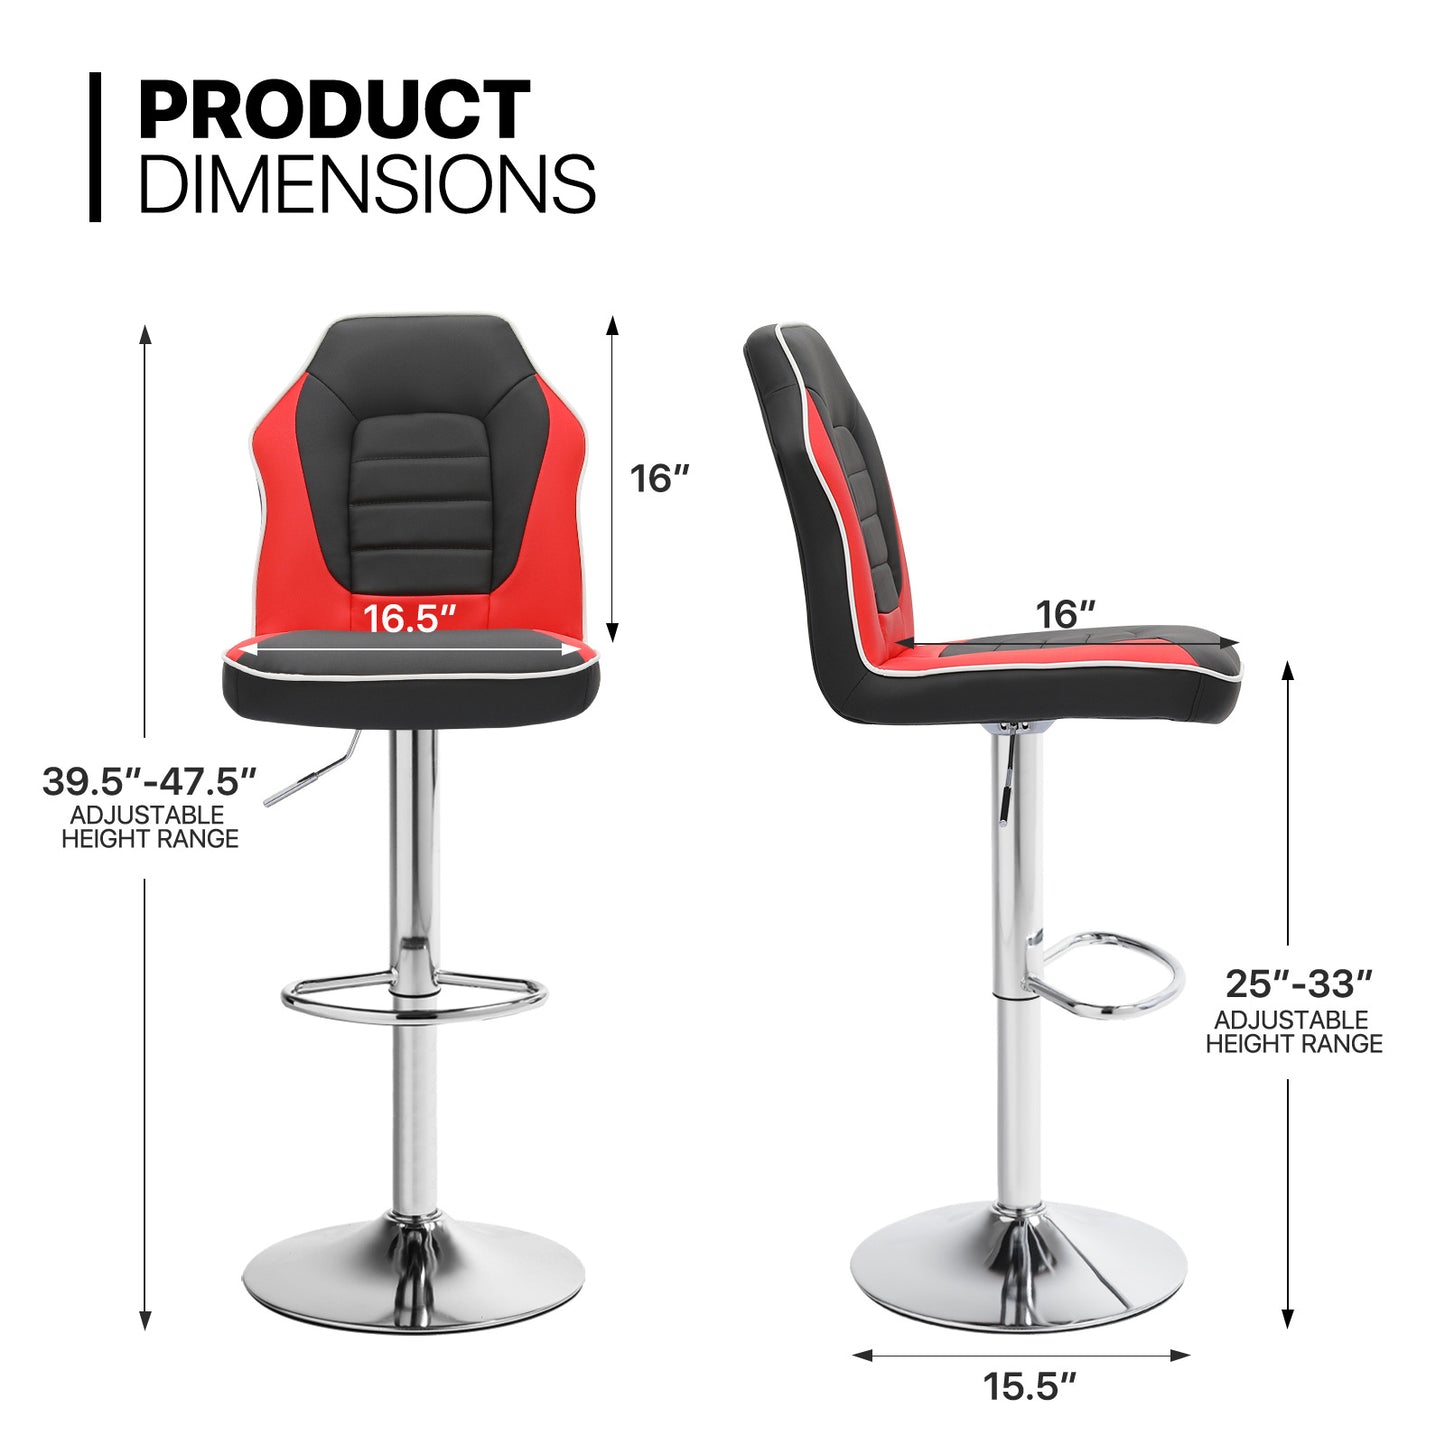 Set of 2 Modern Bar Stools Adjustable Swivel Leather Seat Gaming Chair Style